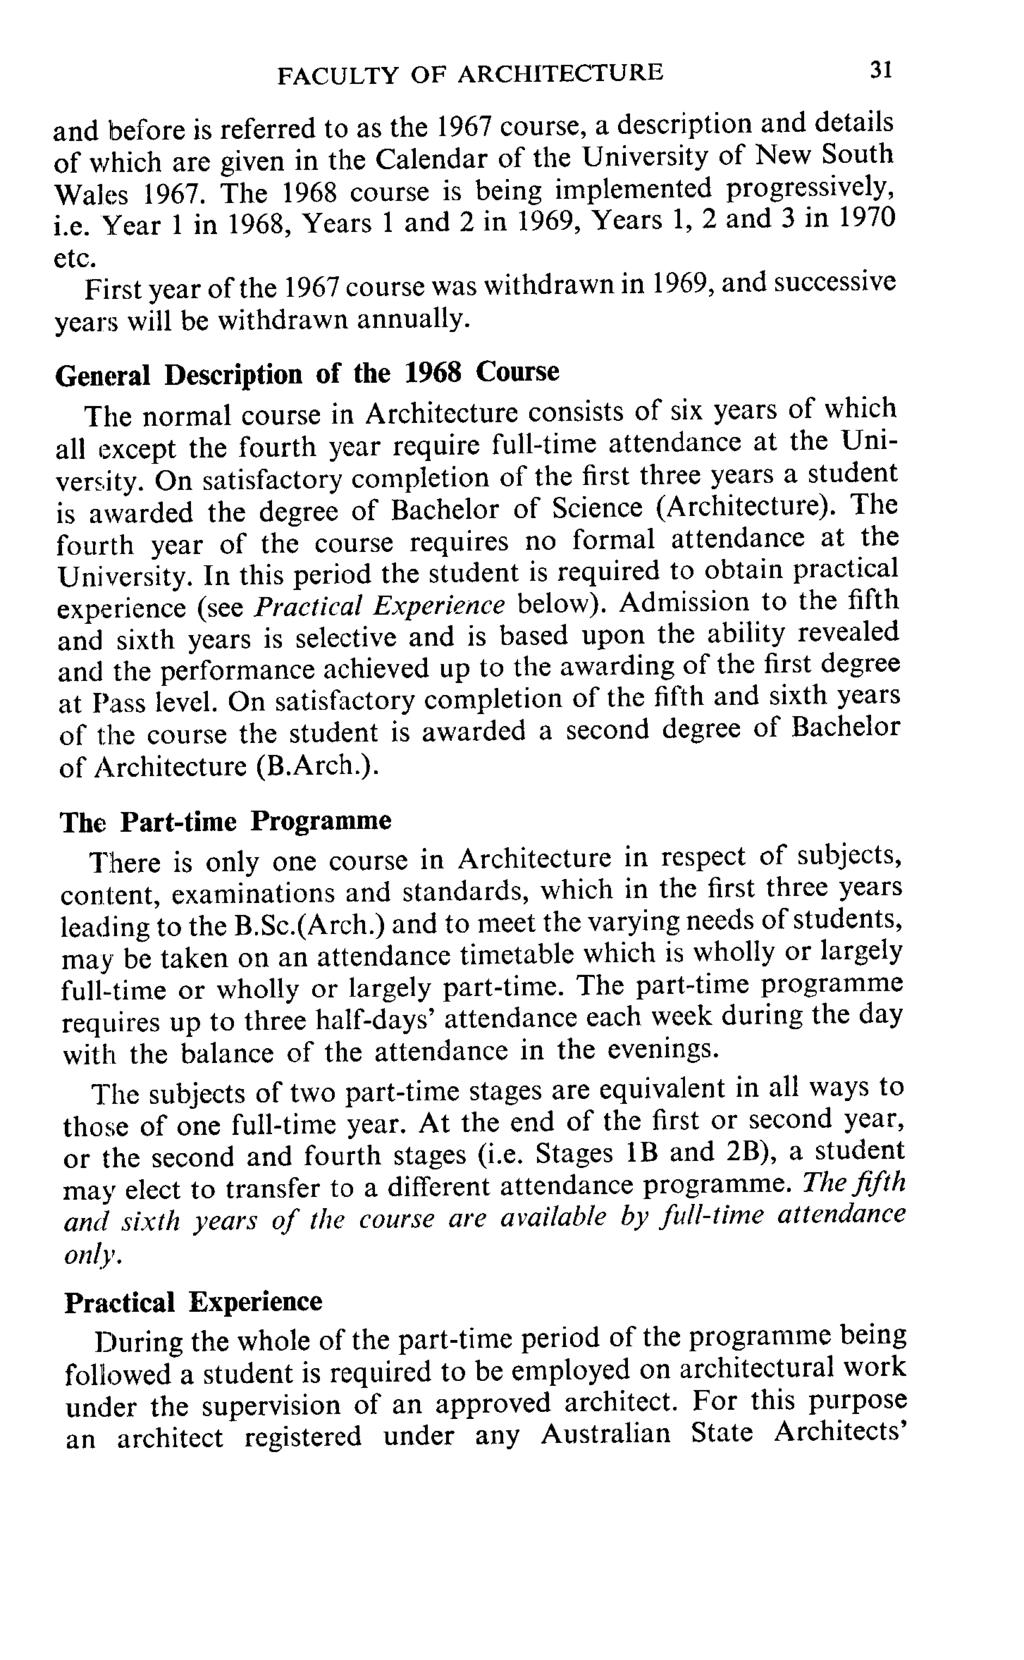 FACULTY OF ARCHITECTURE 31 and before is referred to as the 1967 course, a description and details of v/hich are given in the Calendar of the University of New South Wales 1967.